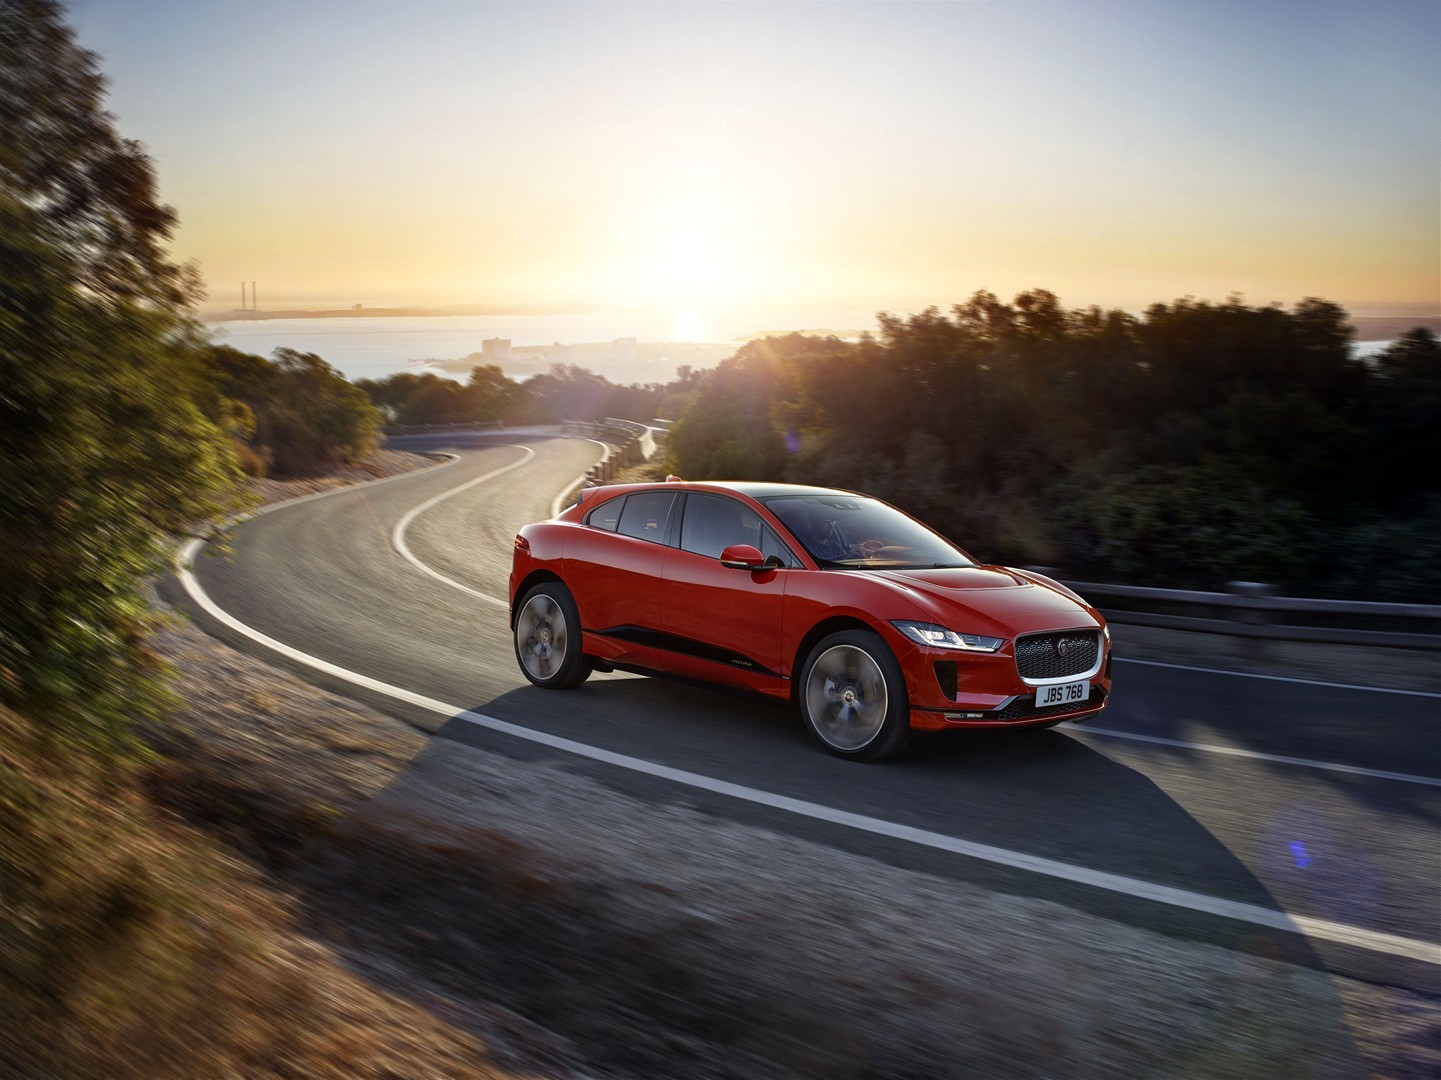 https://s1.cdn.autoevolution.com/images/news/gallery/2020-jaguar-i-pace-update-offers-234-miles-of-range-thanks-to-etrophy-know-how_77.jpg